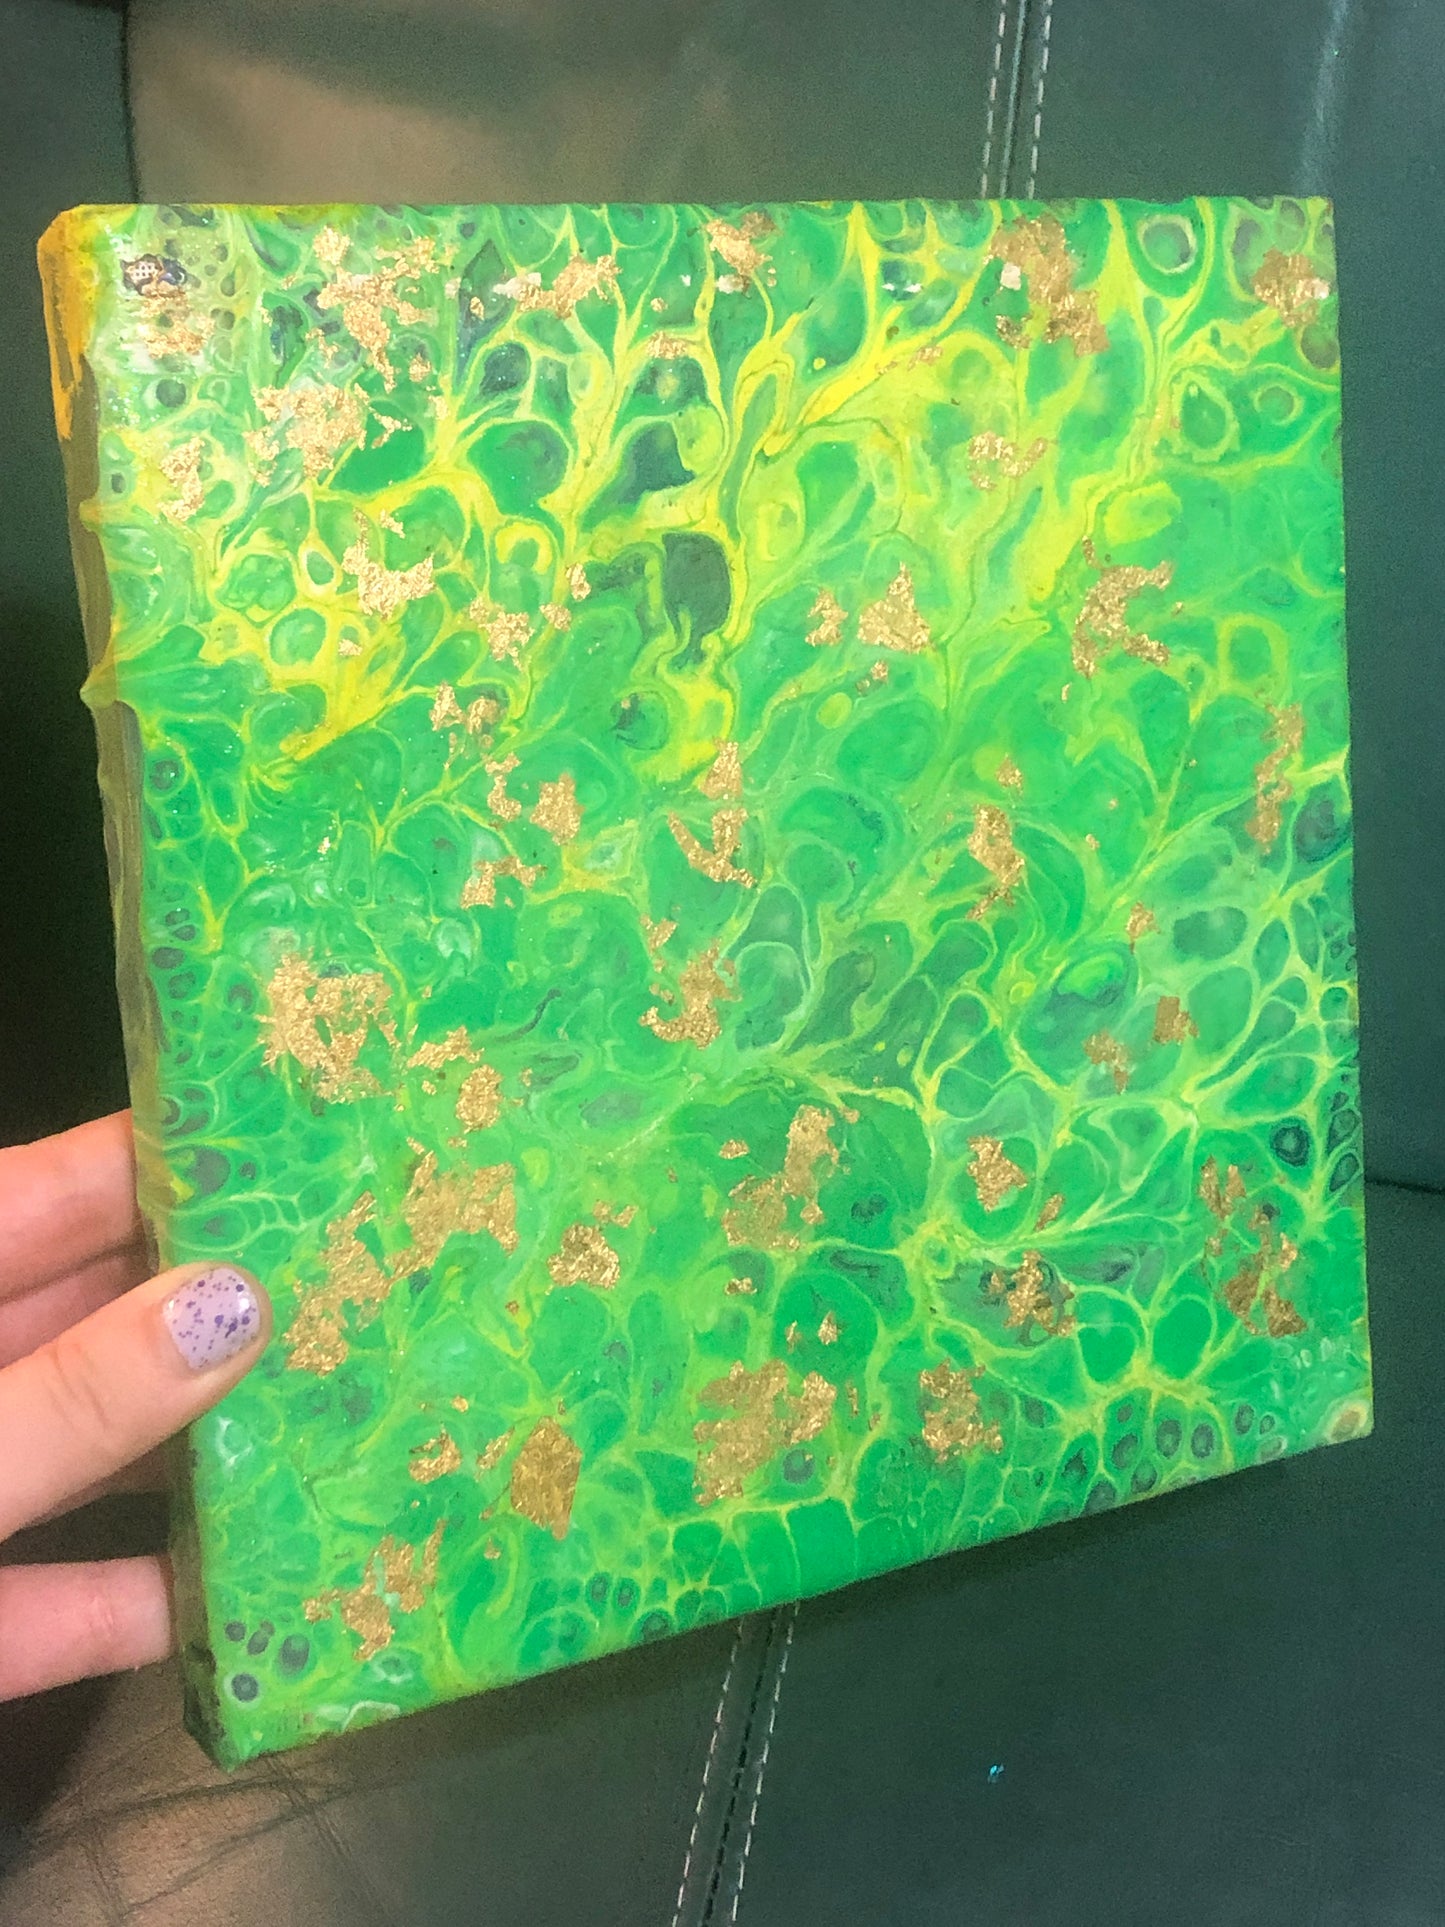 Merry Green and Yellow Glitter Abstract 8x8 Canvas Painting